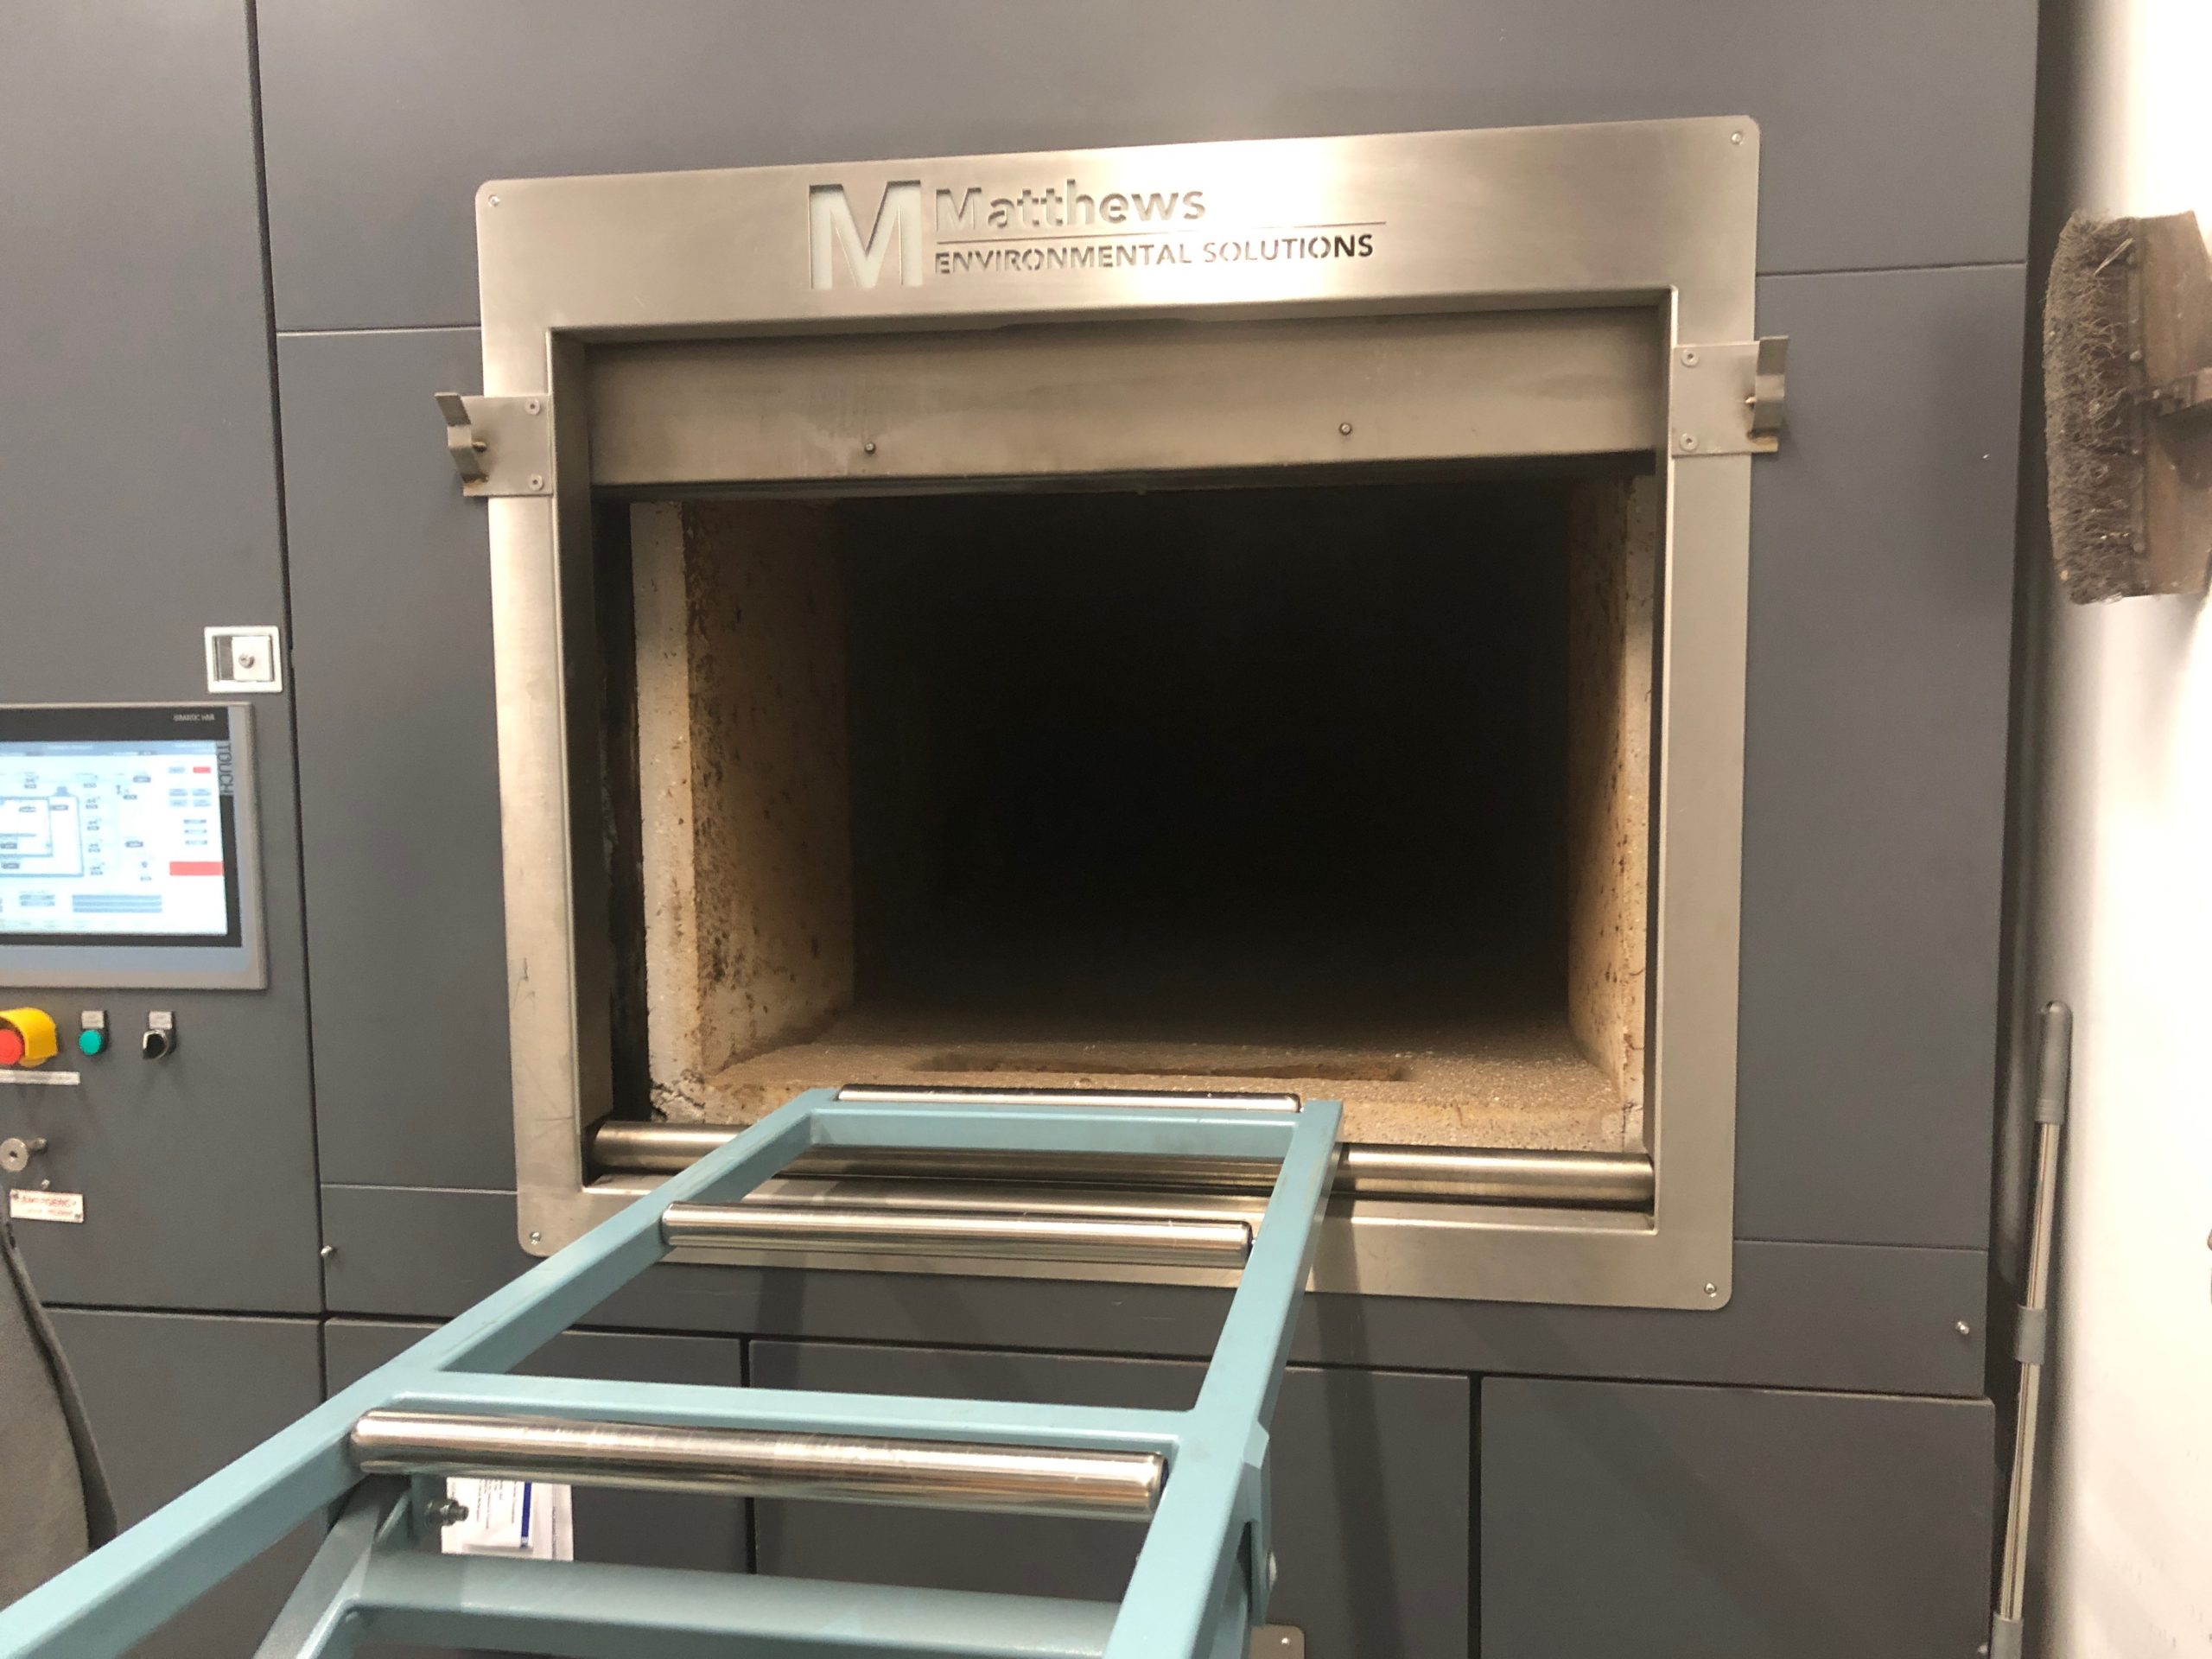 Image of a cremator, the oven where cremation occurs.